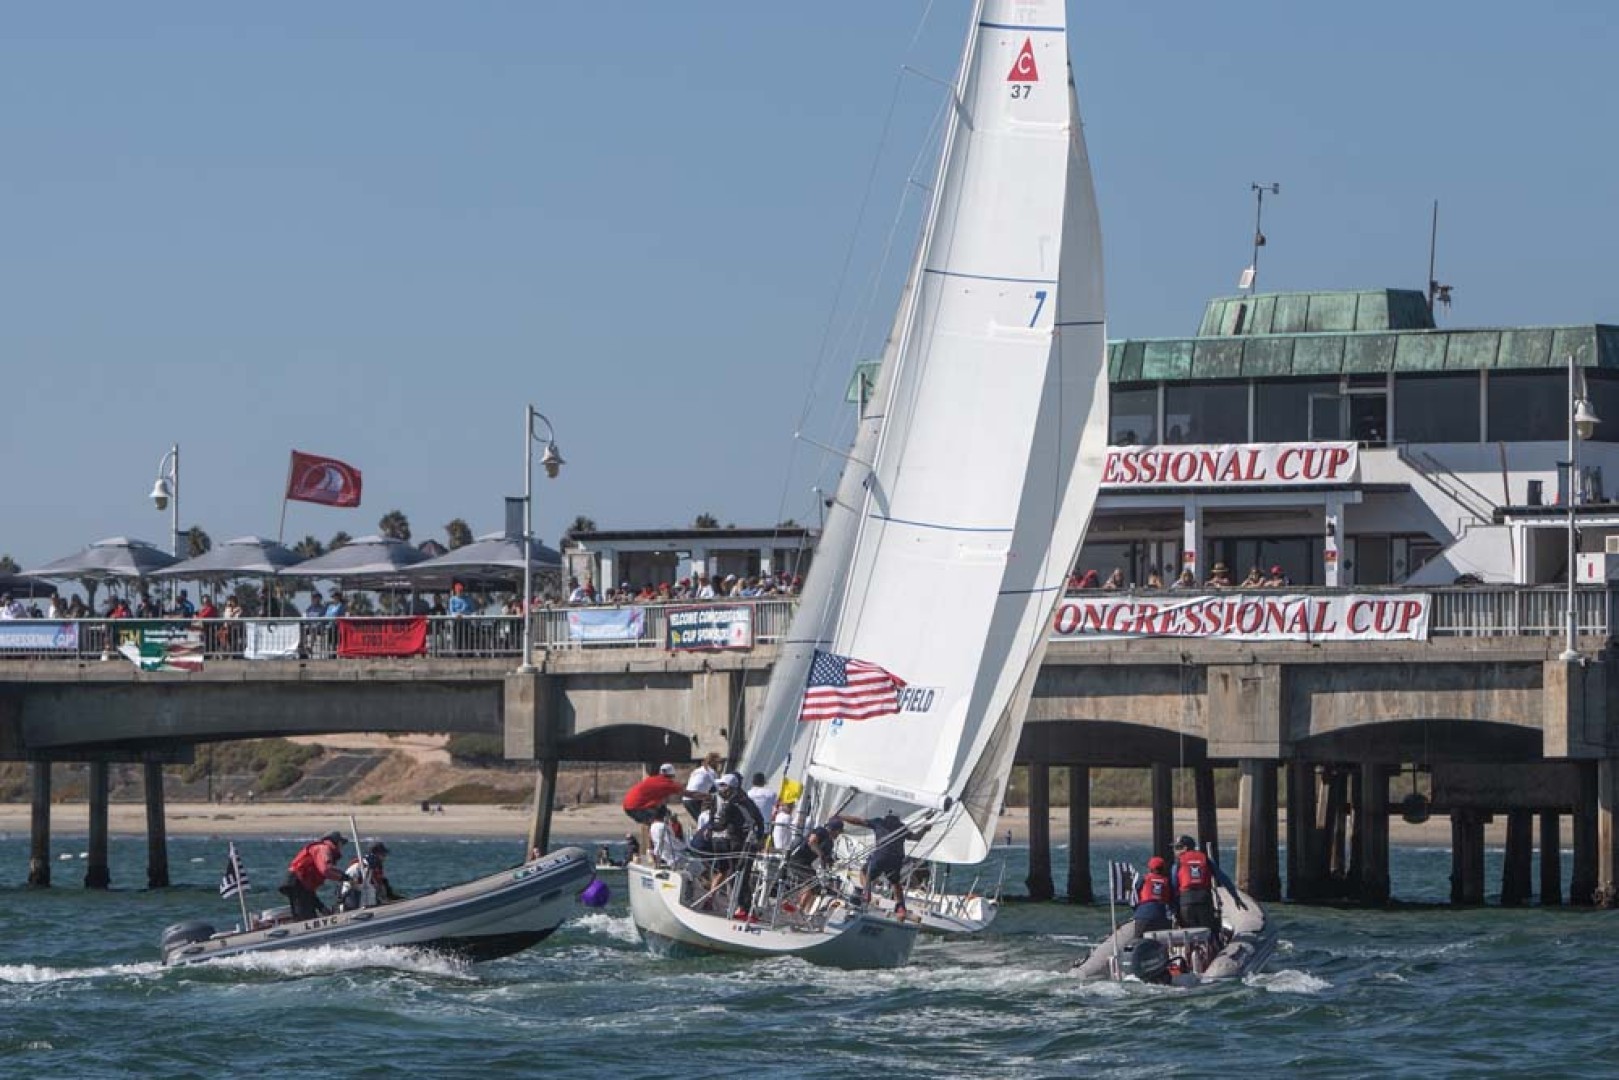 Long Beach Yacht Club is ramping up for Congressional Cup 2022